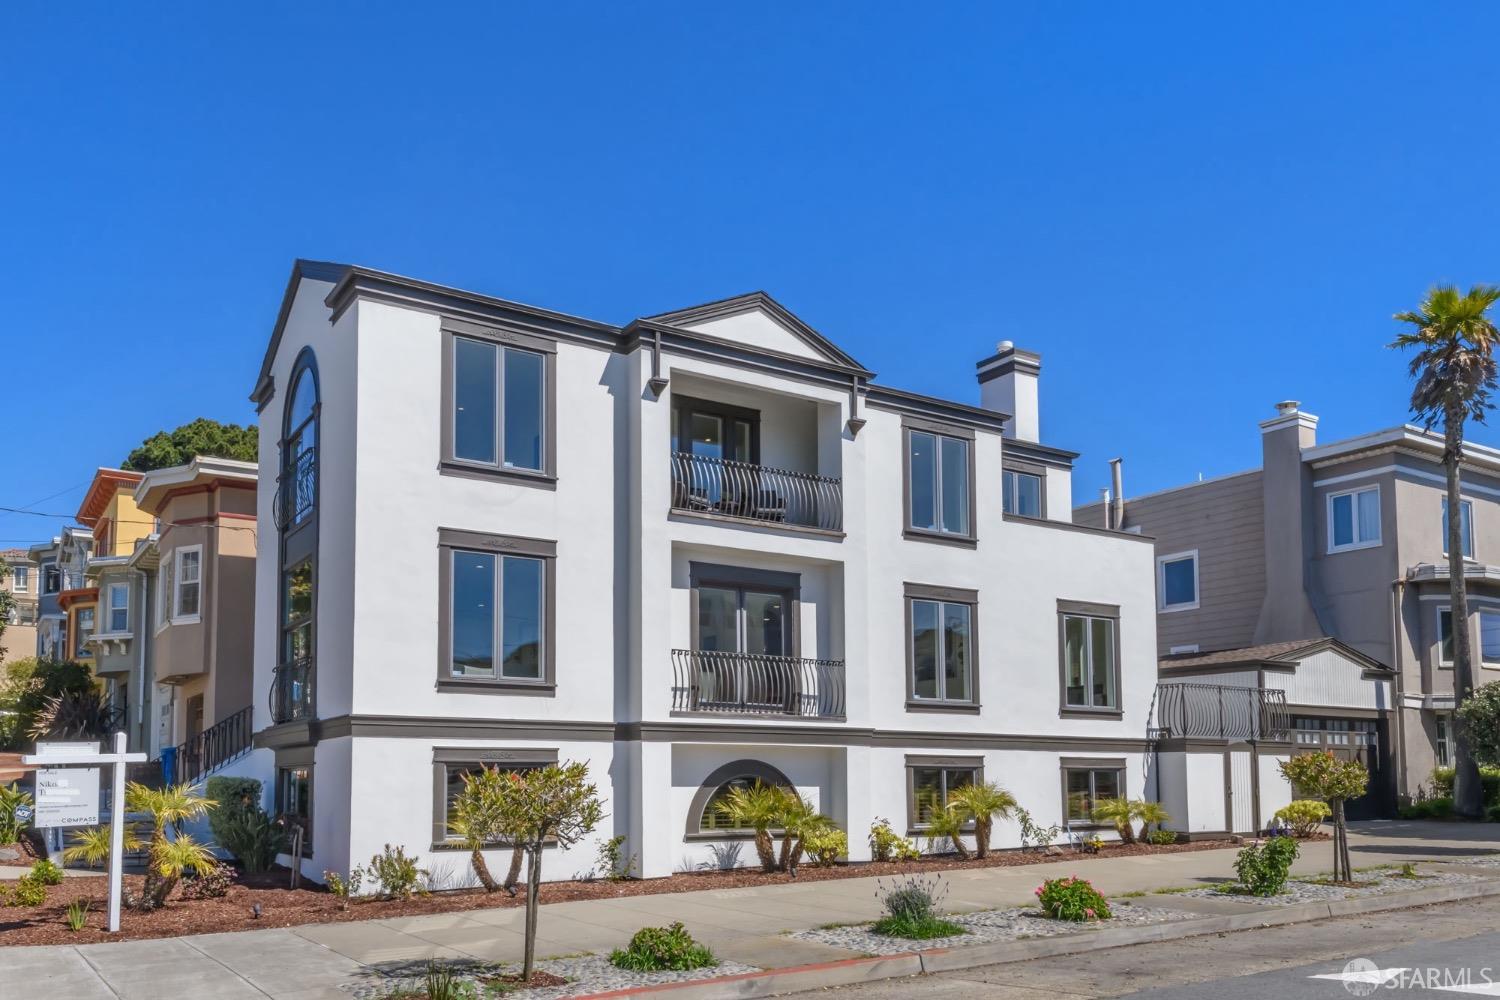 Photo of 496 38th Ave in San Francisco, CA